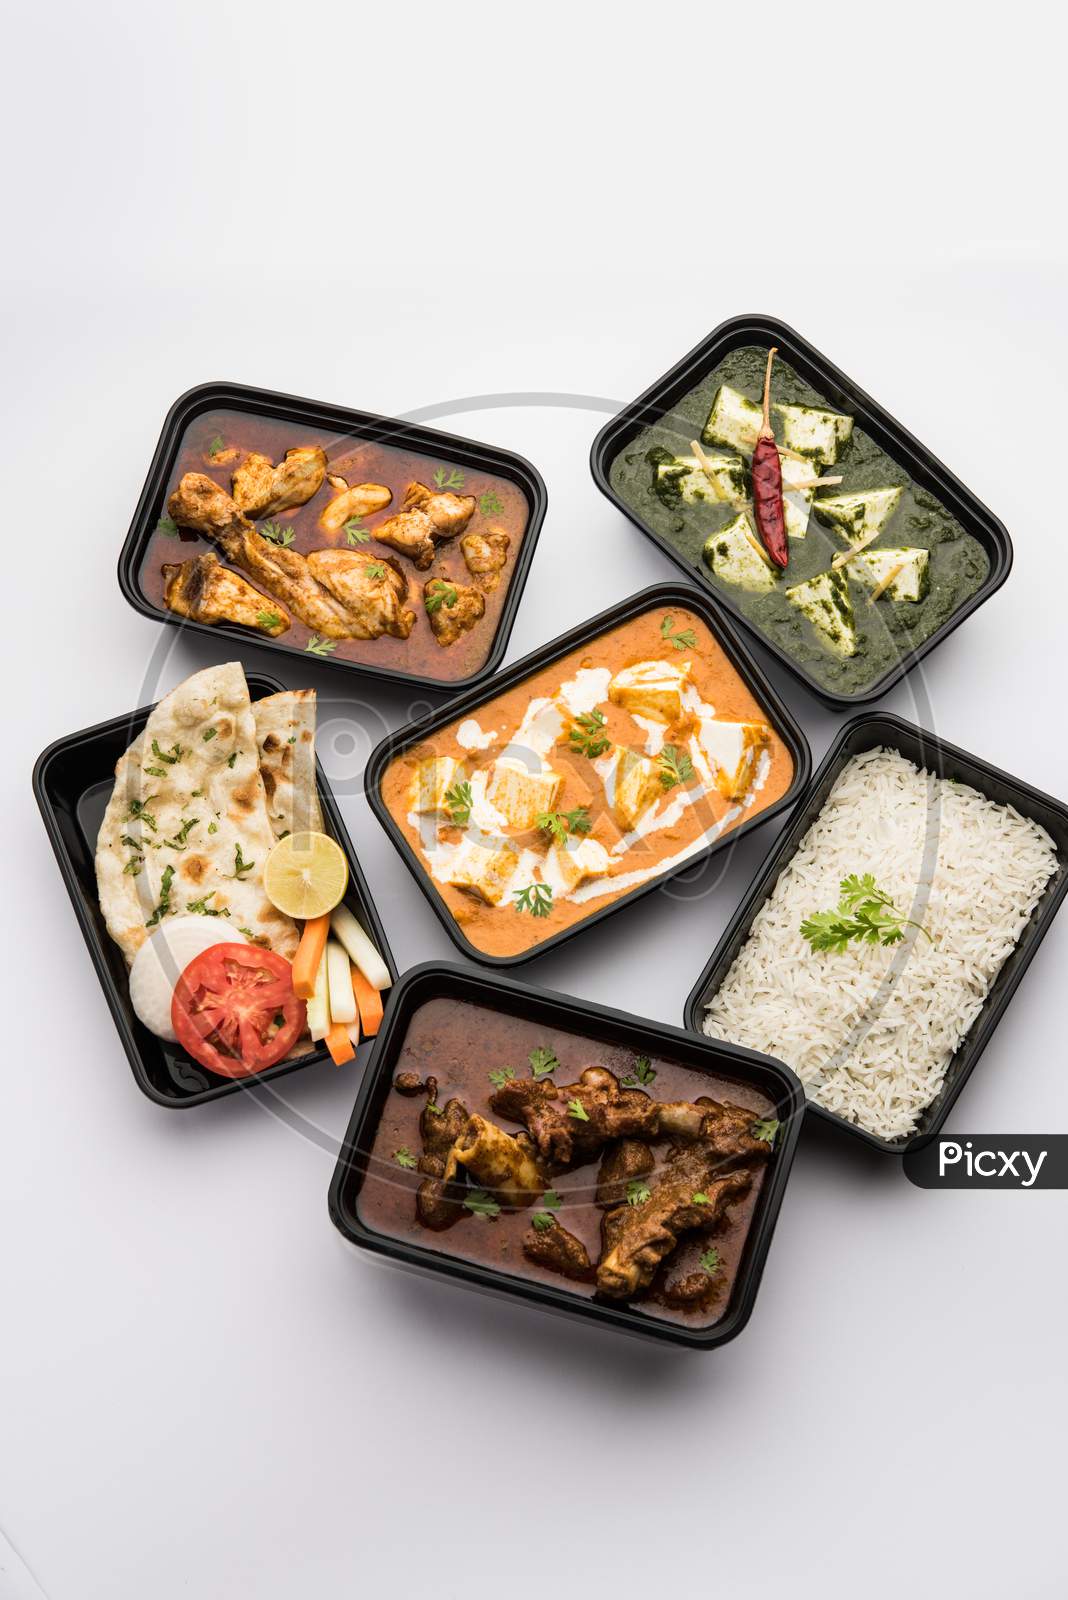 Online food delivery - Chicken & mutton curry with Palak Paneer Butter masala packed in plastic container